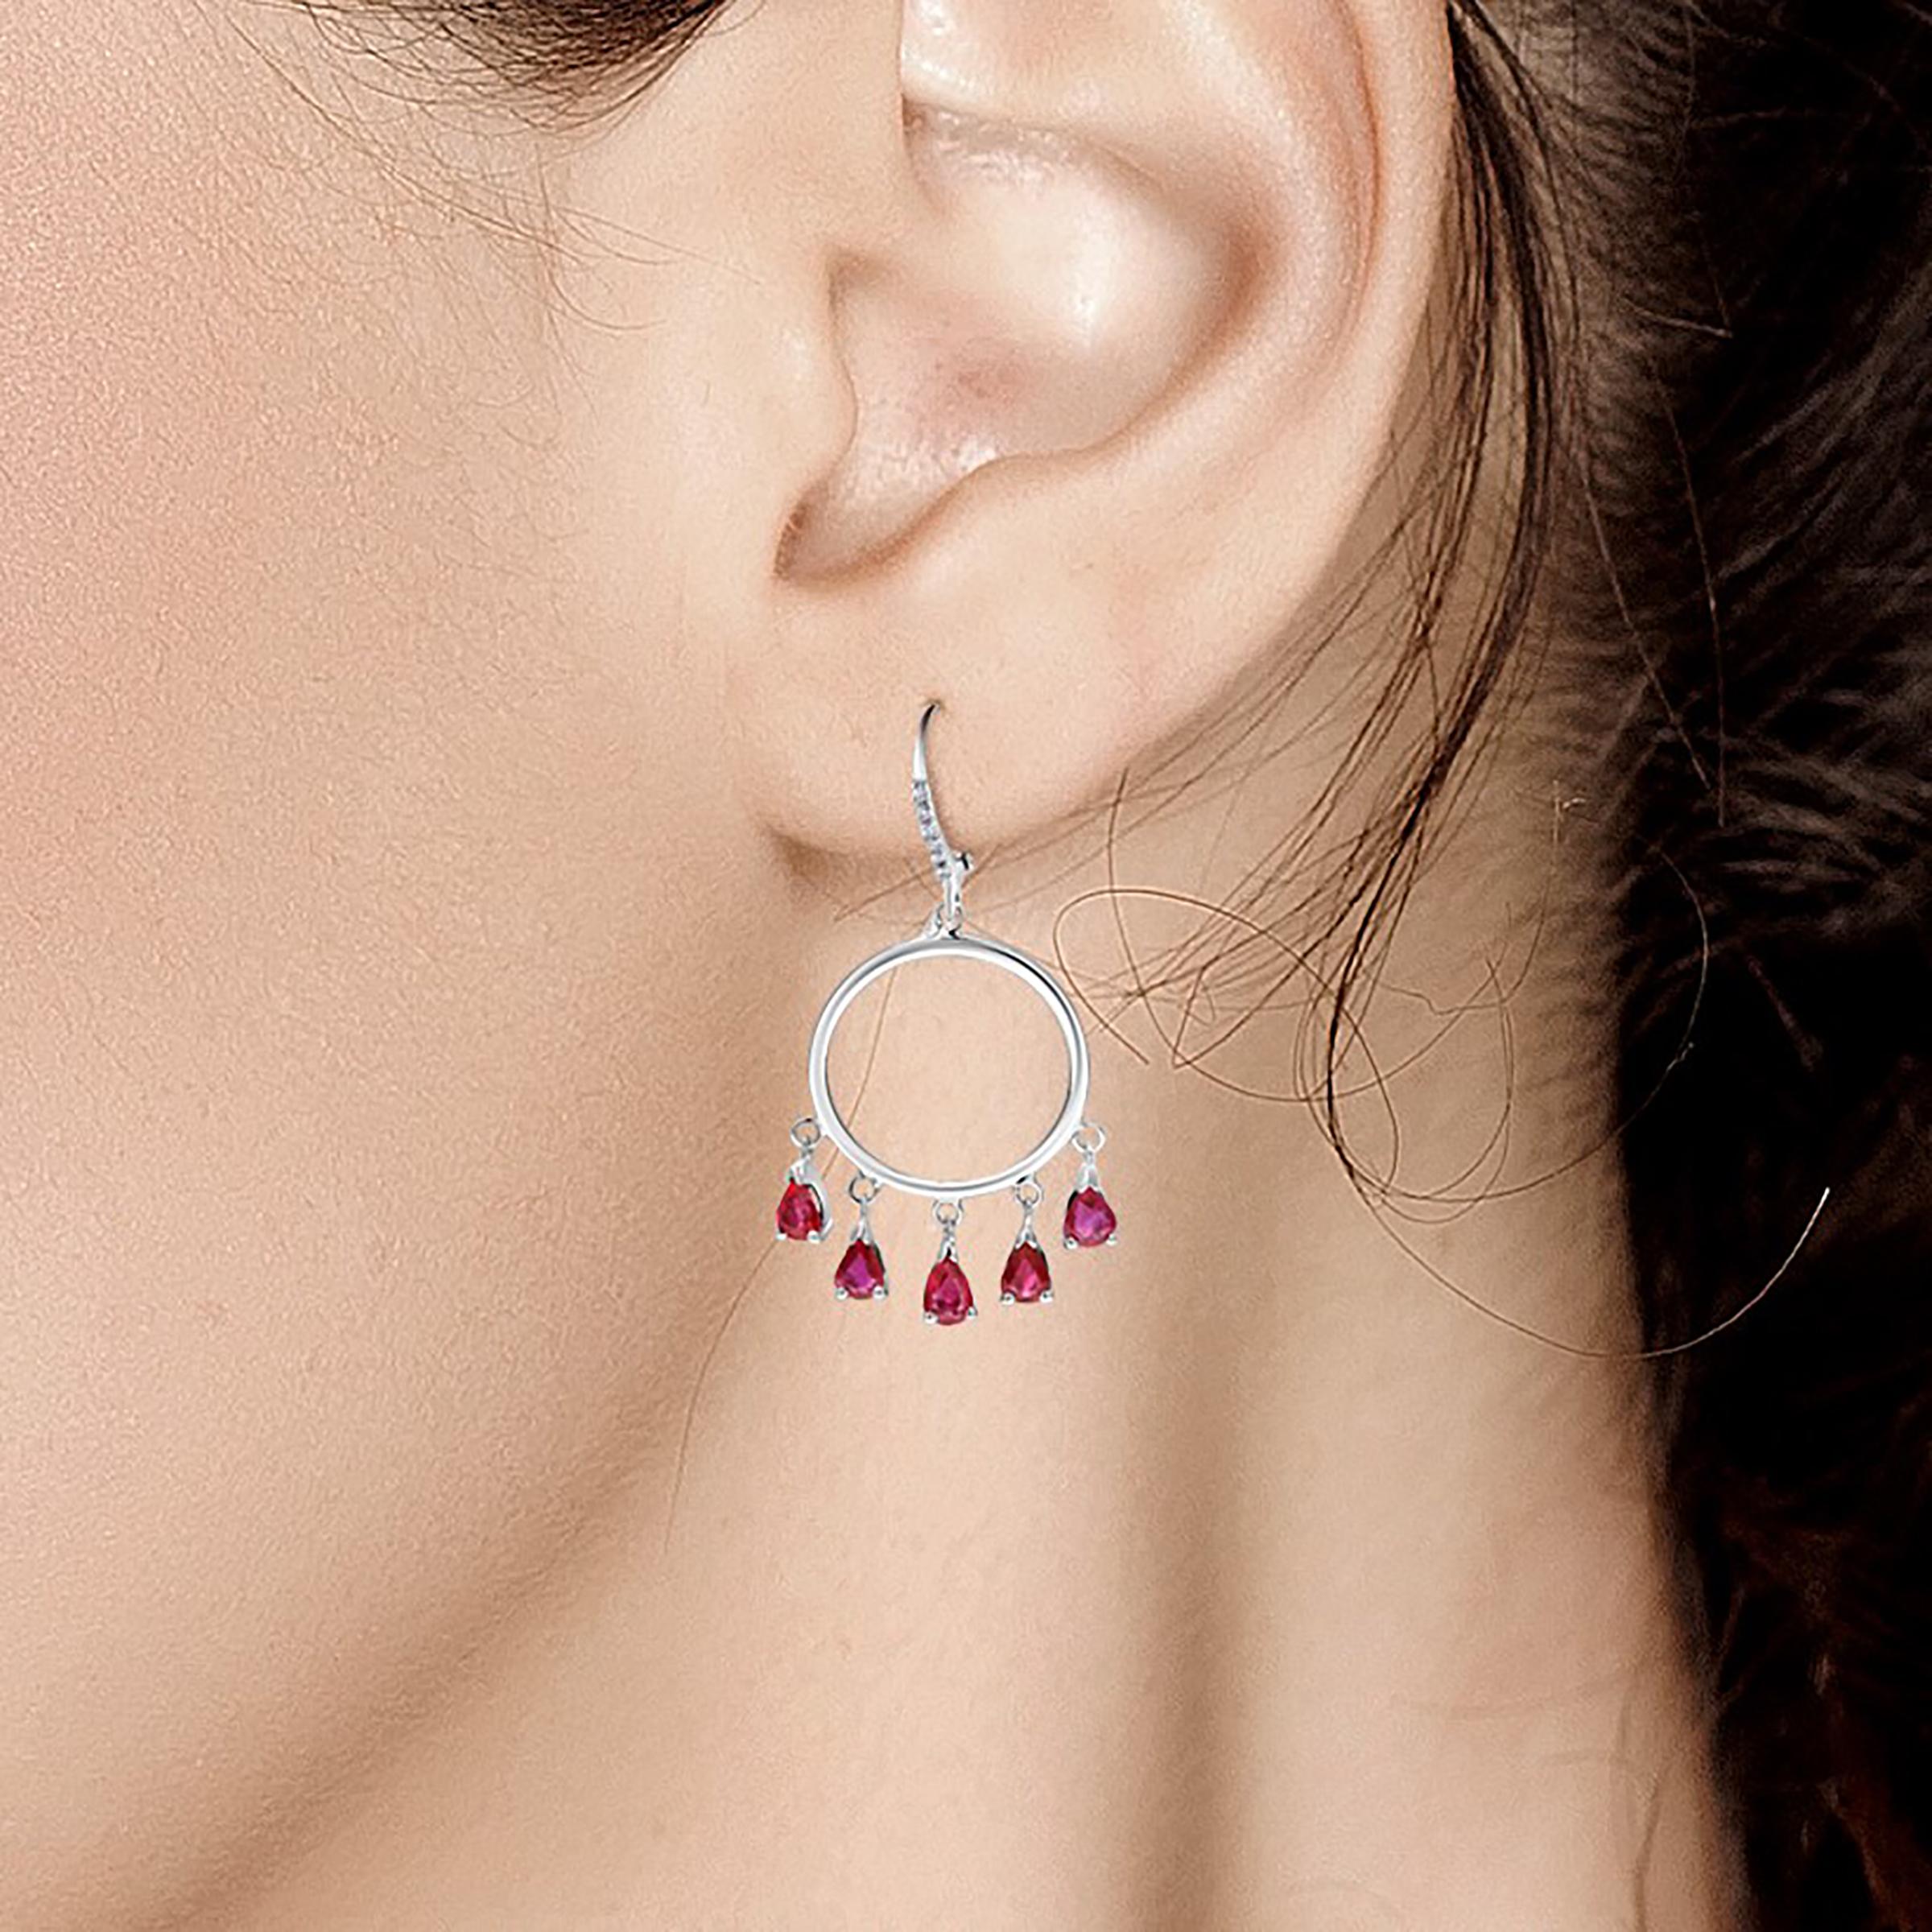 Fourteen karats white gold diamond and ruby circle hoop earrings 
Ten pear shape ruby drops weighing 3 carat
Diamond weighing 0.20 carat 
New Earrings
Handmade in the USA
One of a kind earrings 
Our design team select gemstones for their quality,